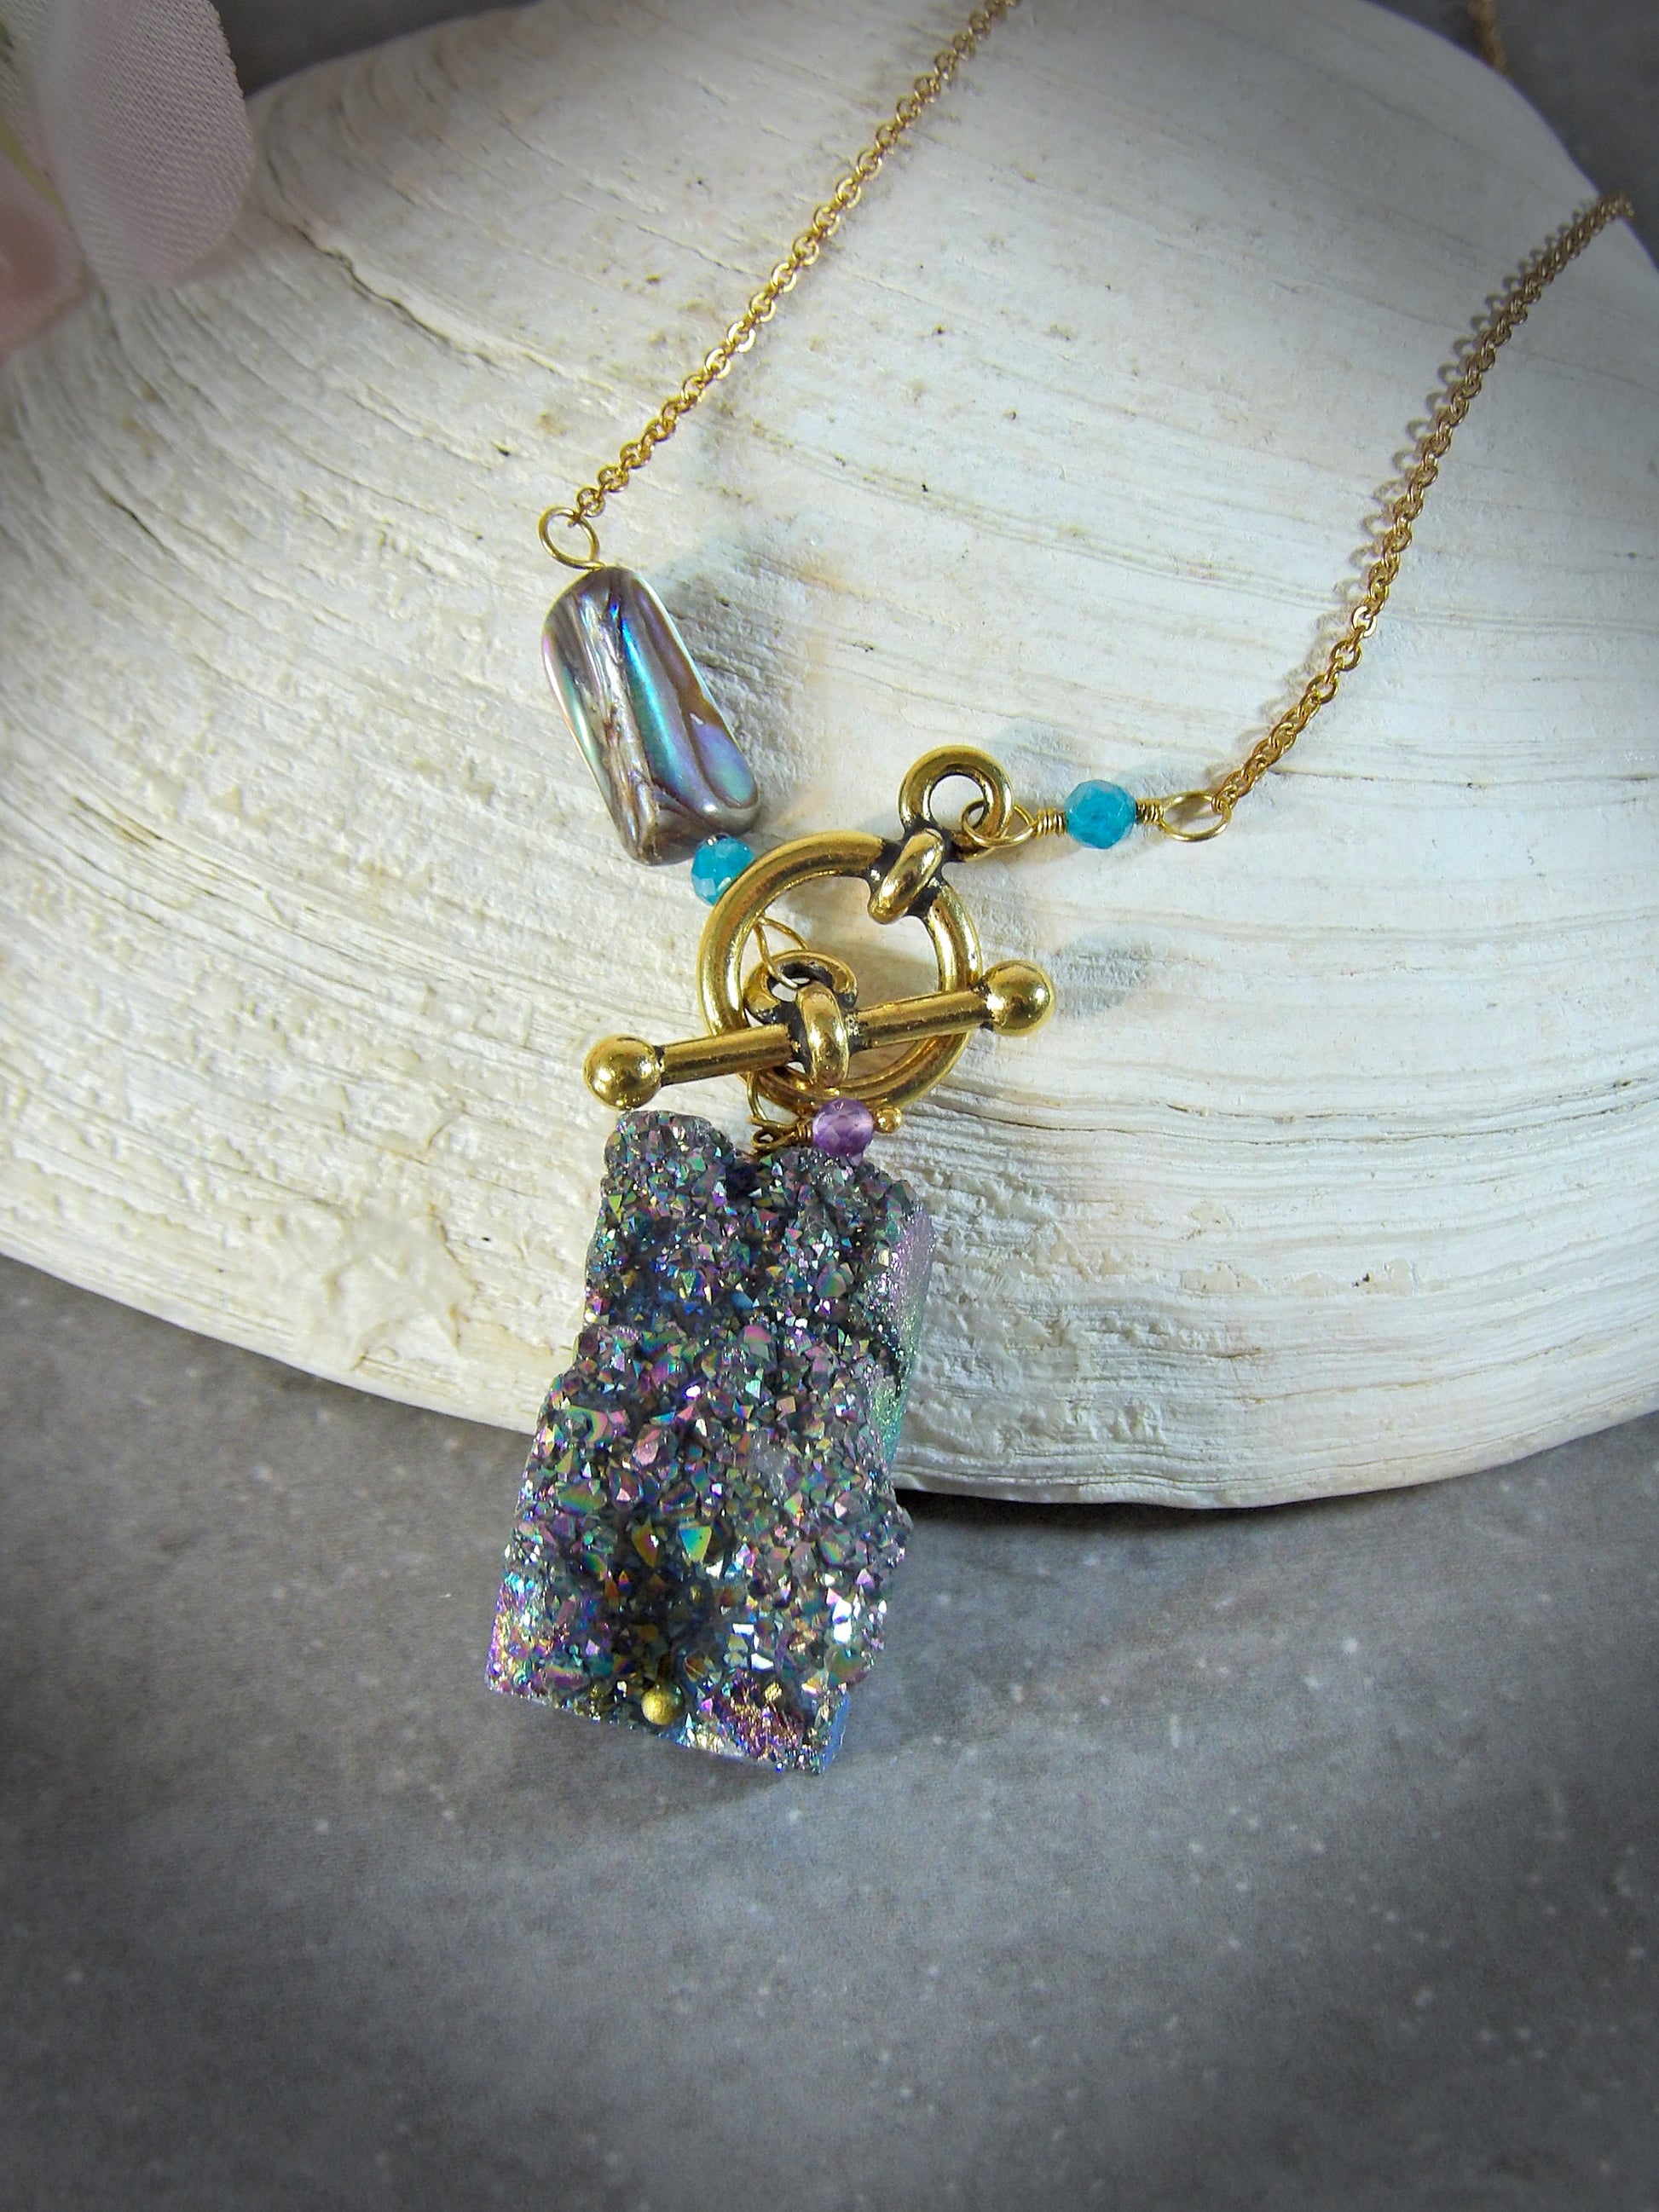 druzy agate necklace with toggle clasp blue apatite and amethyst